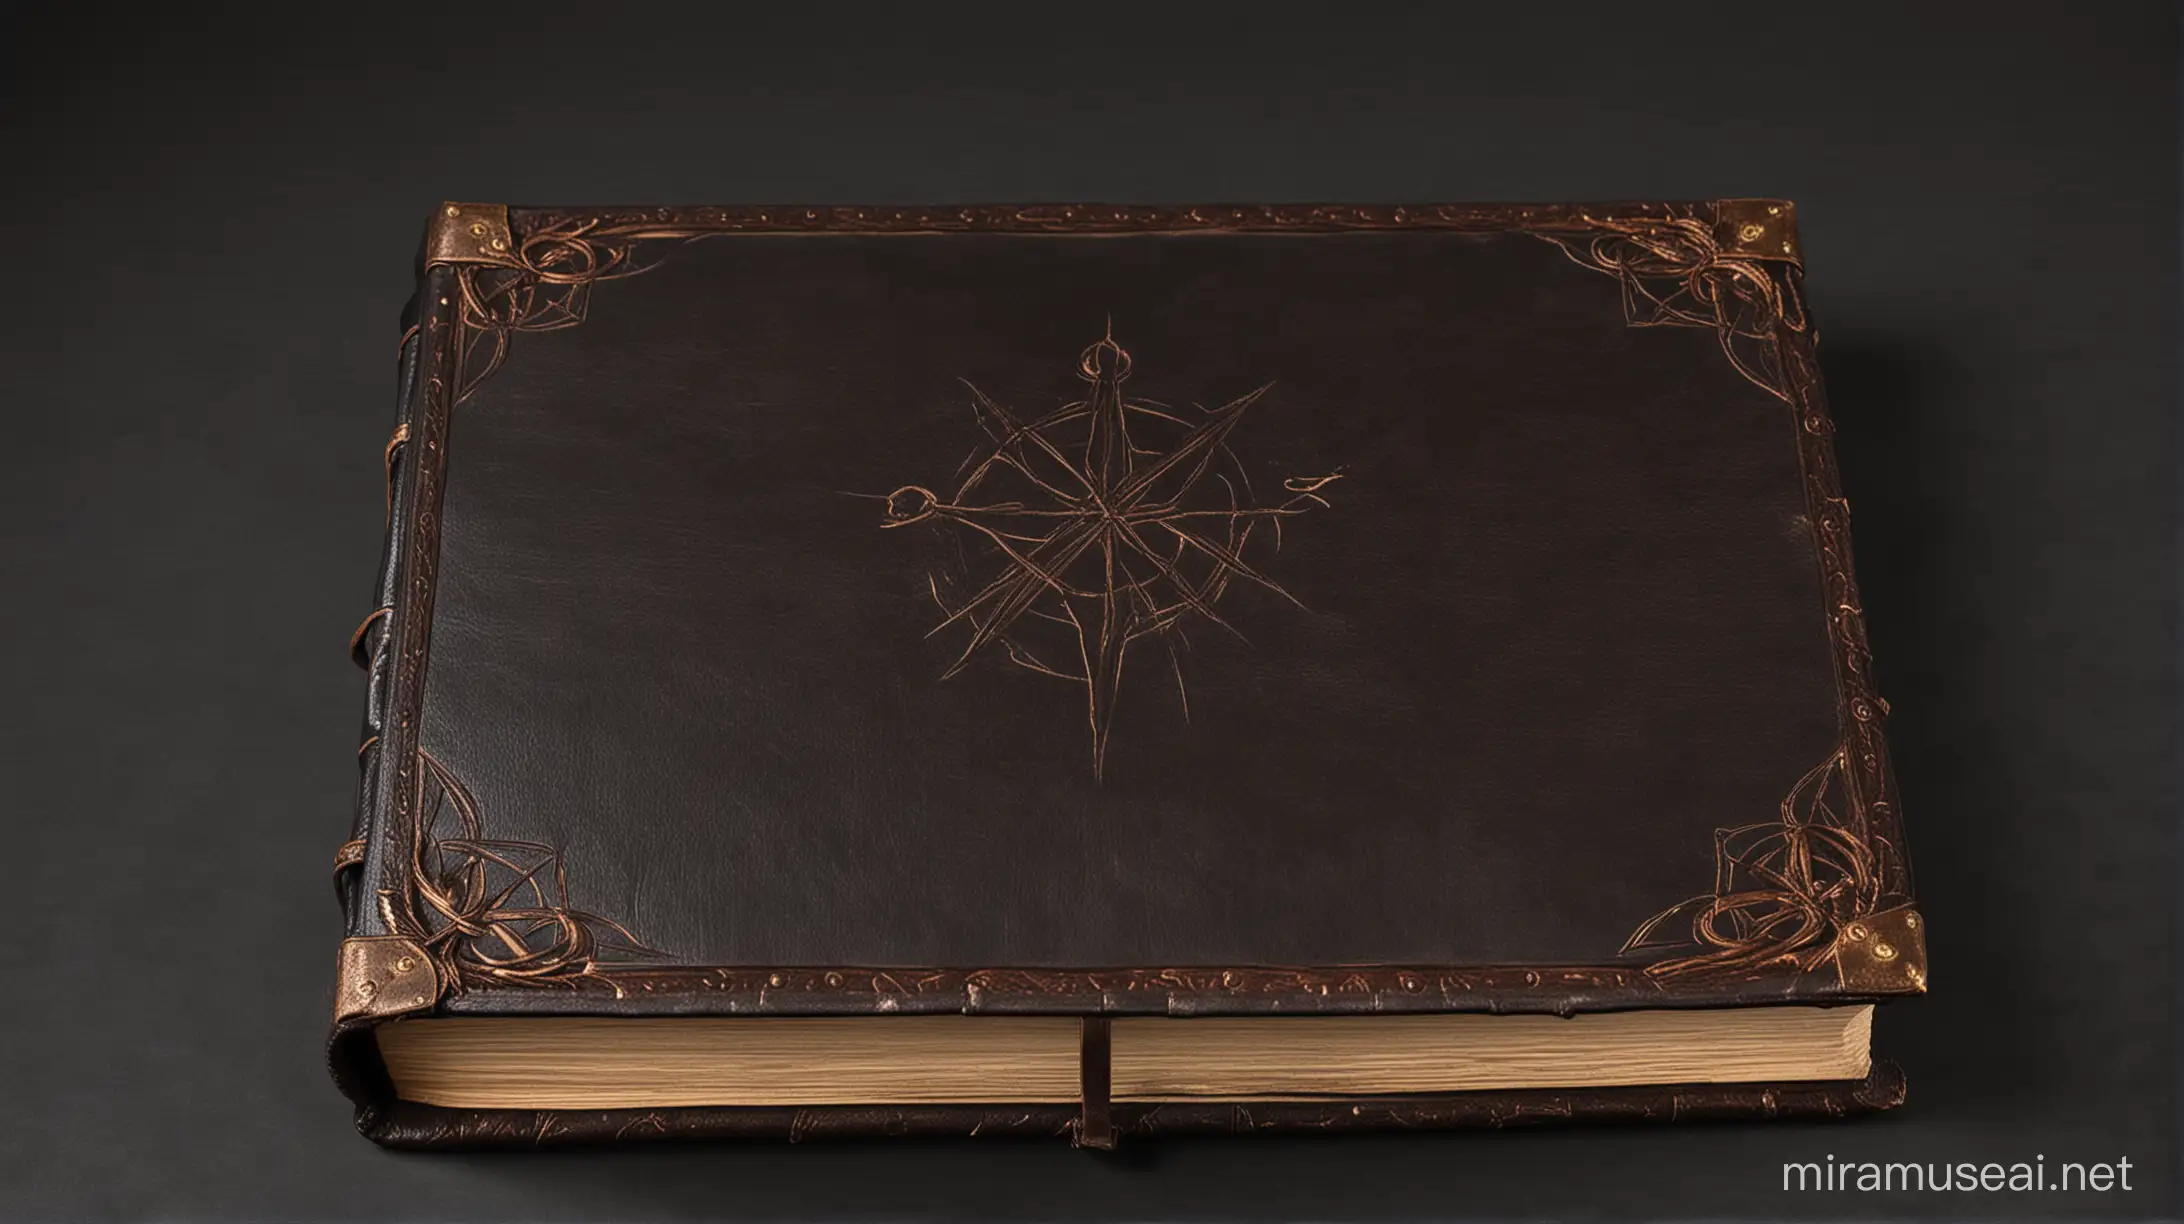 dark-colored, leatherbound, forbidden book, with no wording or images on the cover